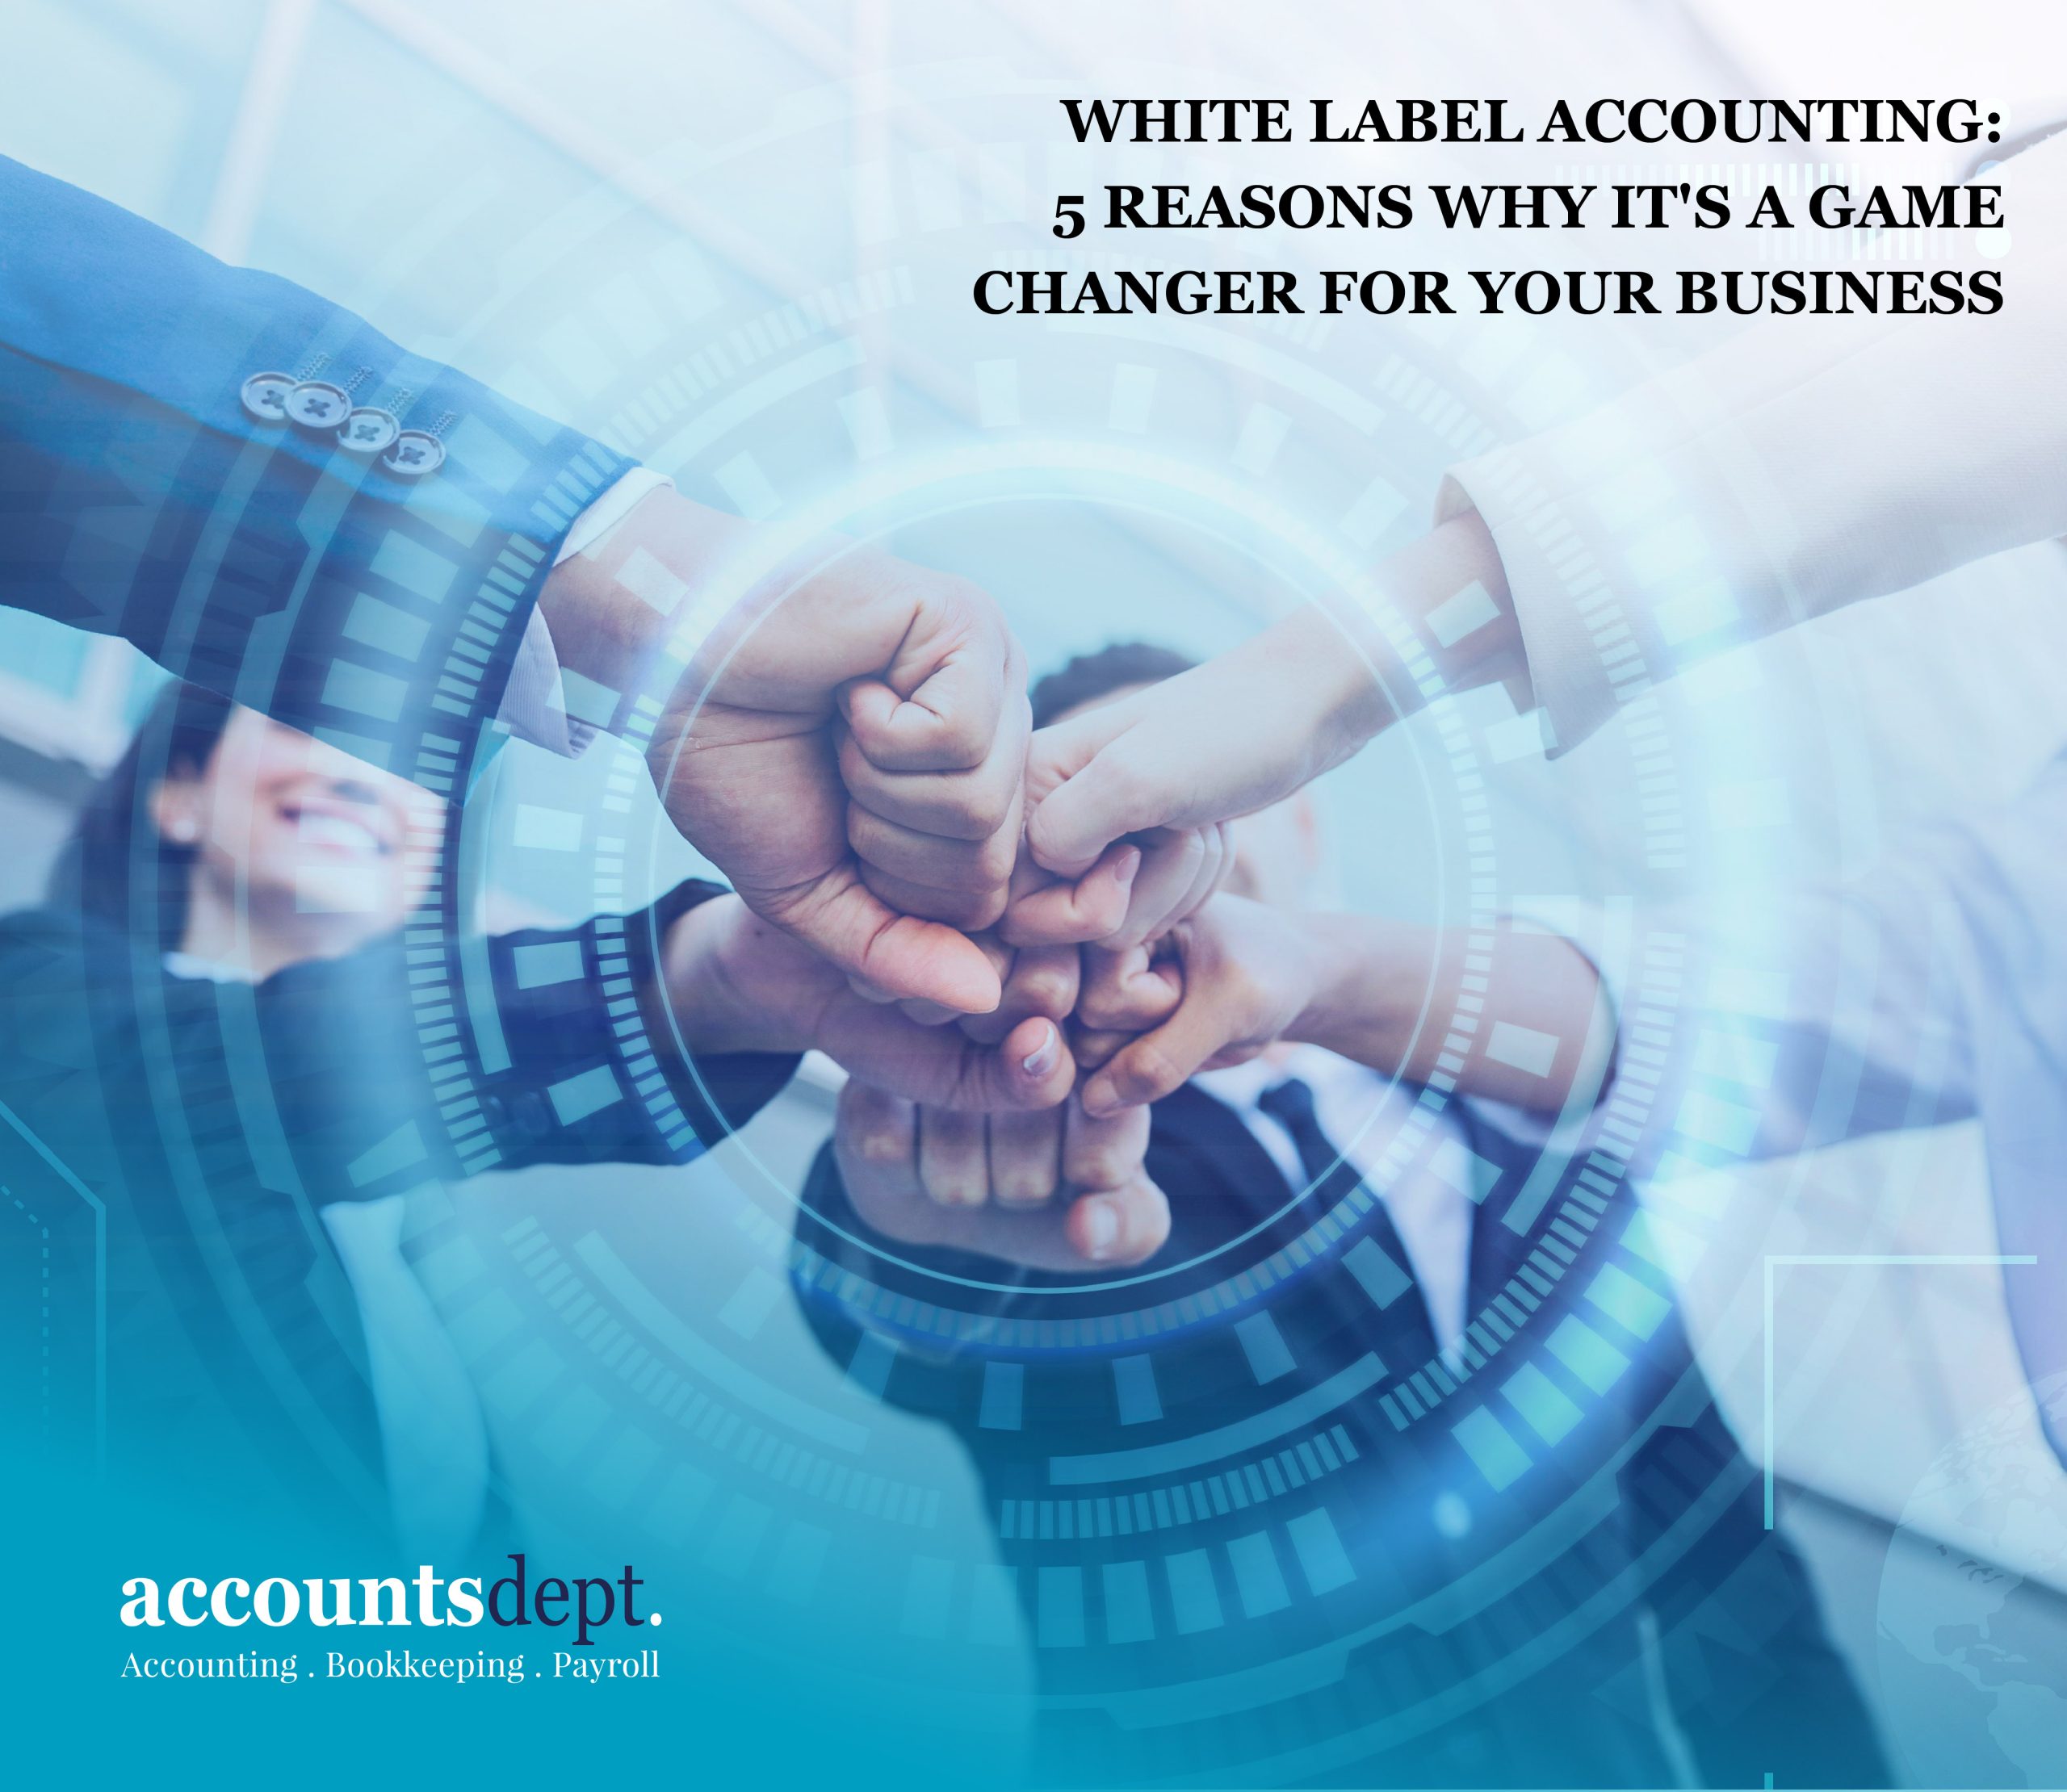 White label accounting